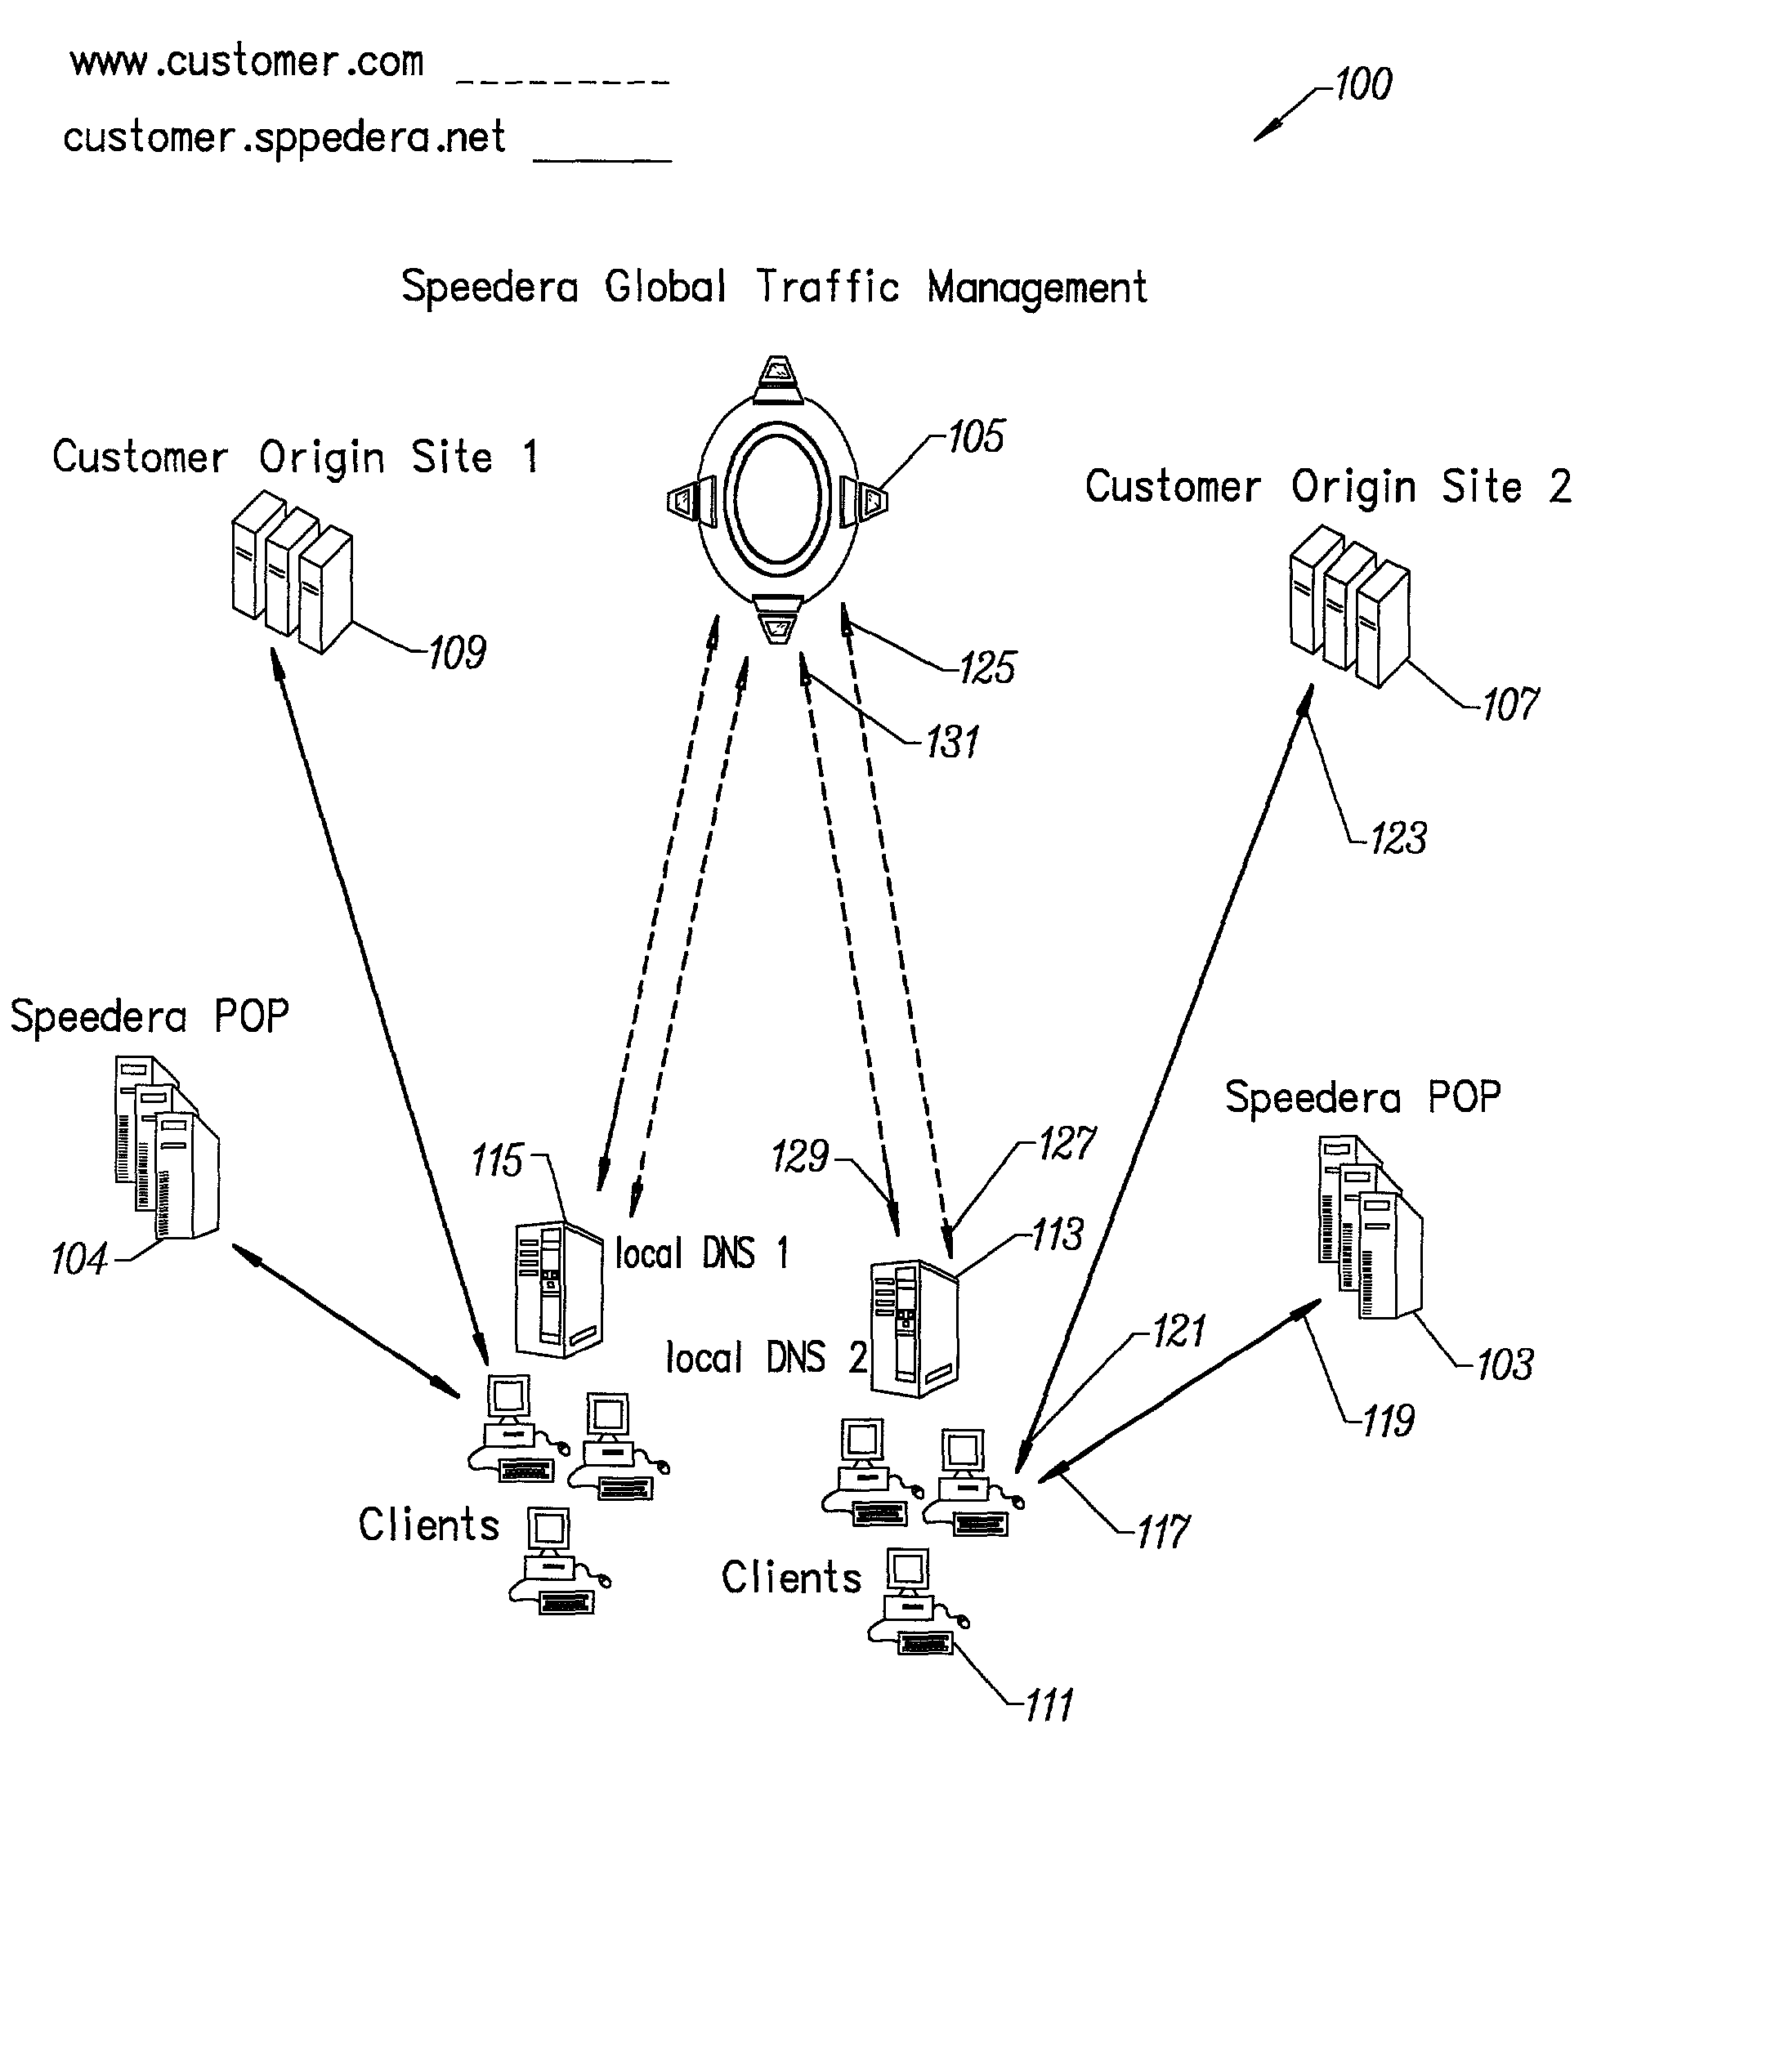 Method for determining metrics of a content delivery and global traffic management network